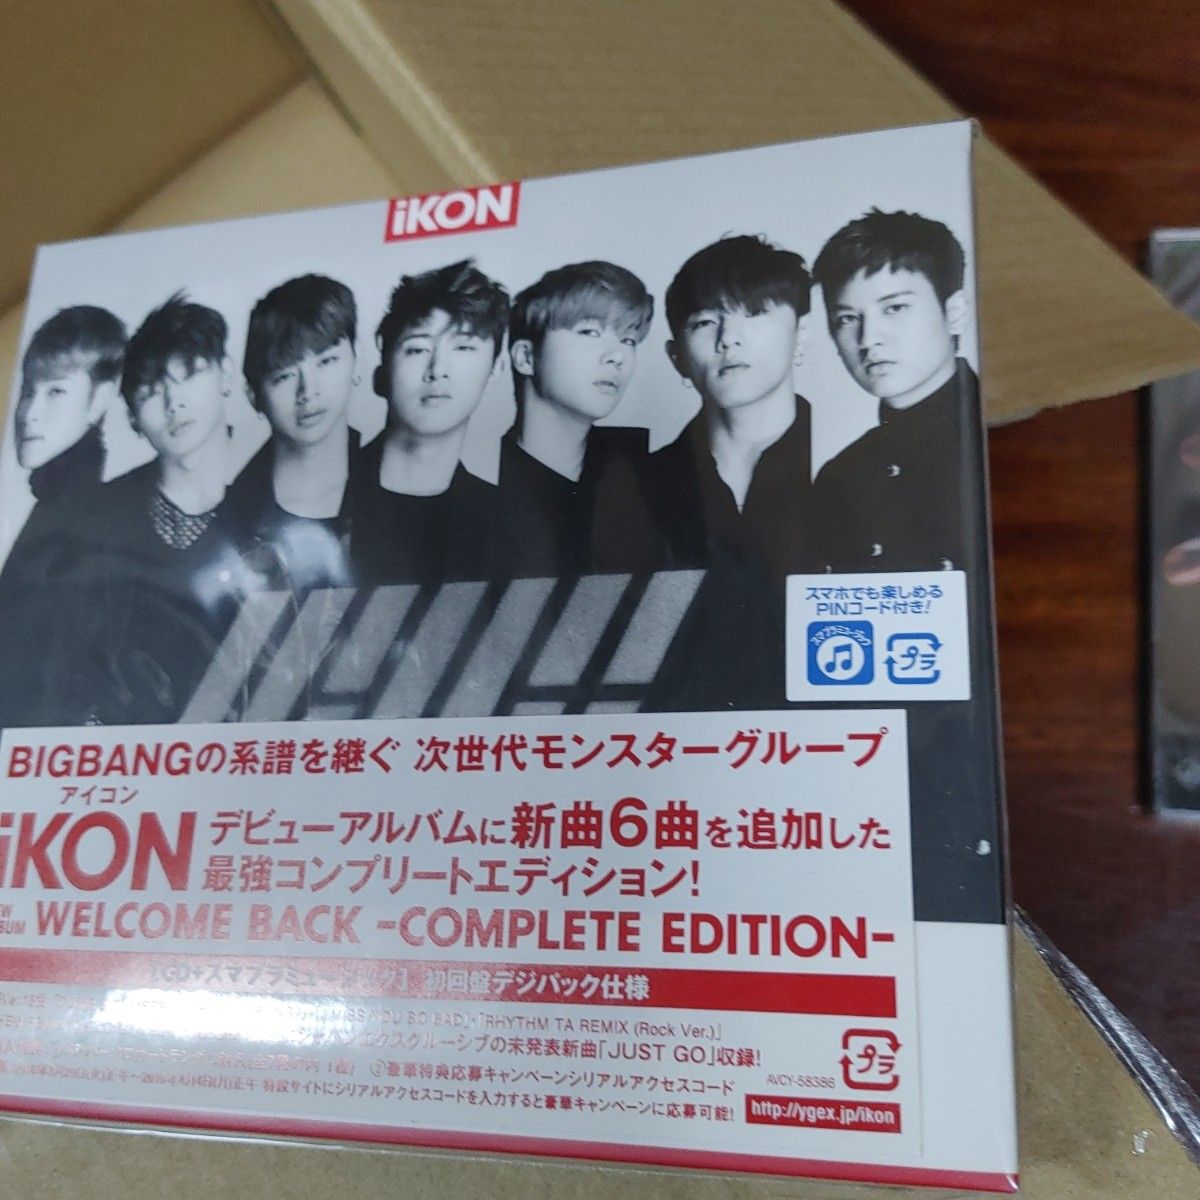 [257] CD iKON WELCOME BACK -COMPLETE EDITION- ケース交換